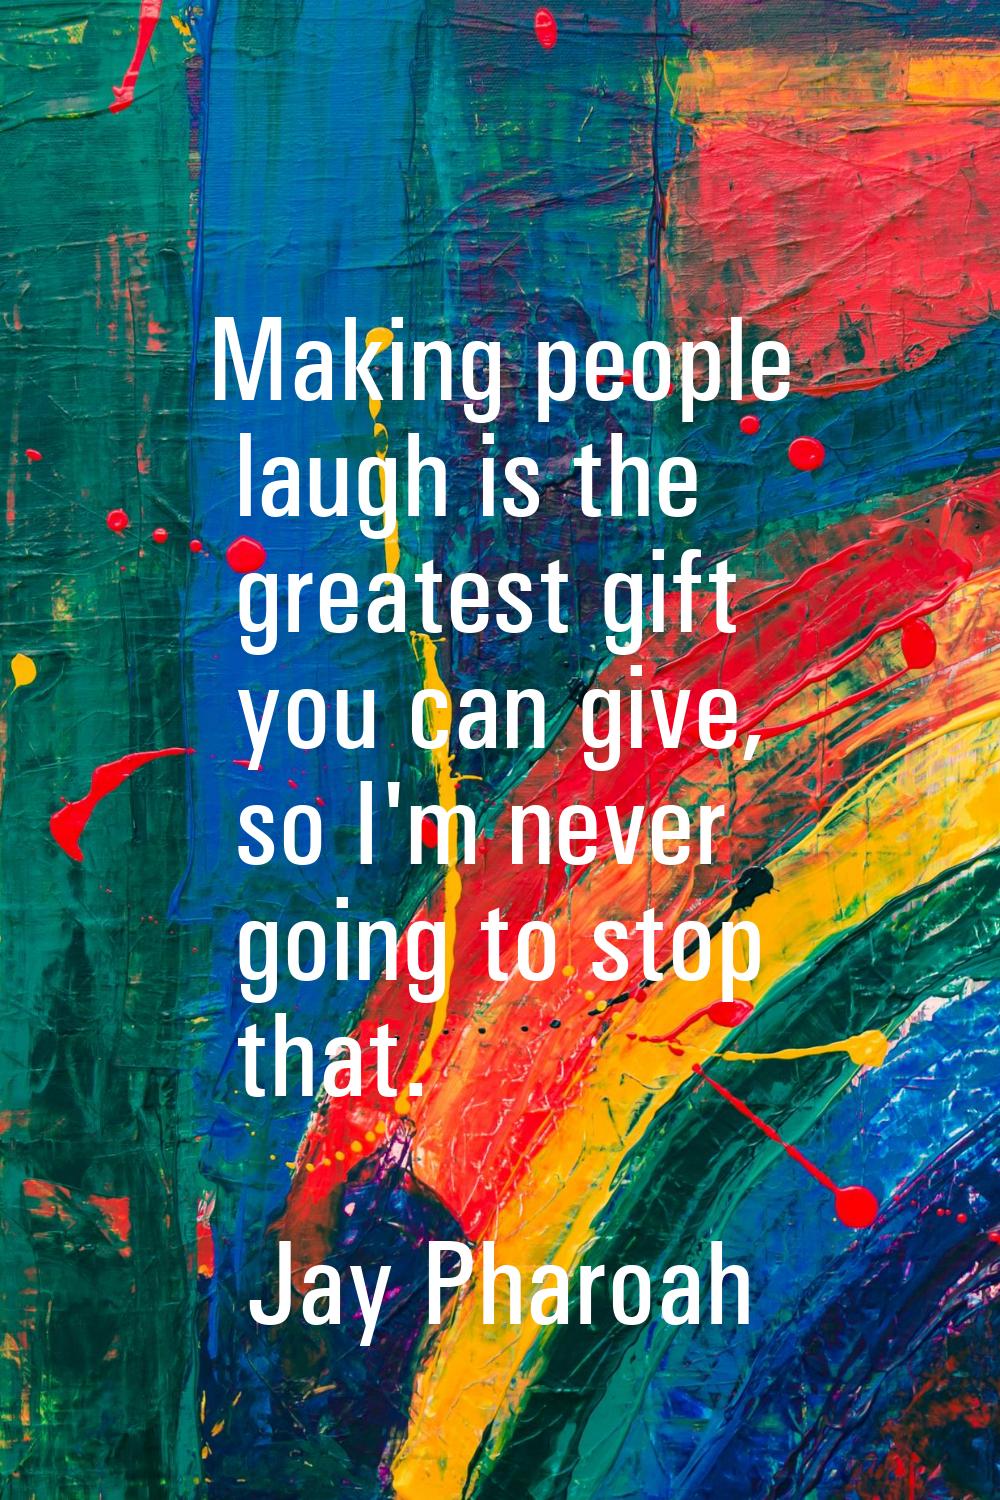 Making people laugh is the greatest gift you can give, so I'm never going to stop that.